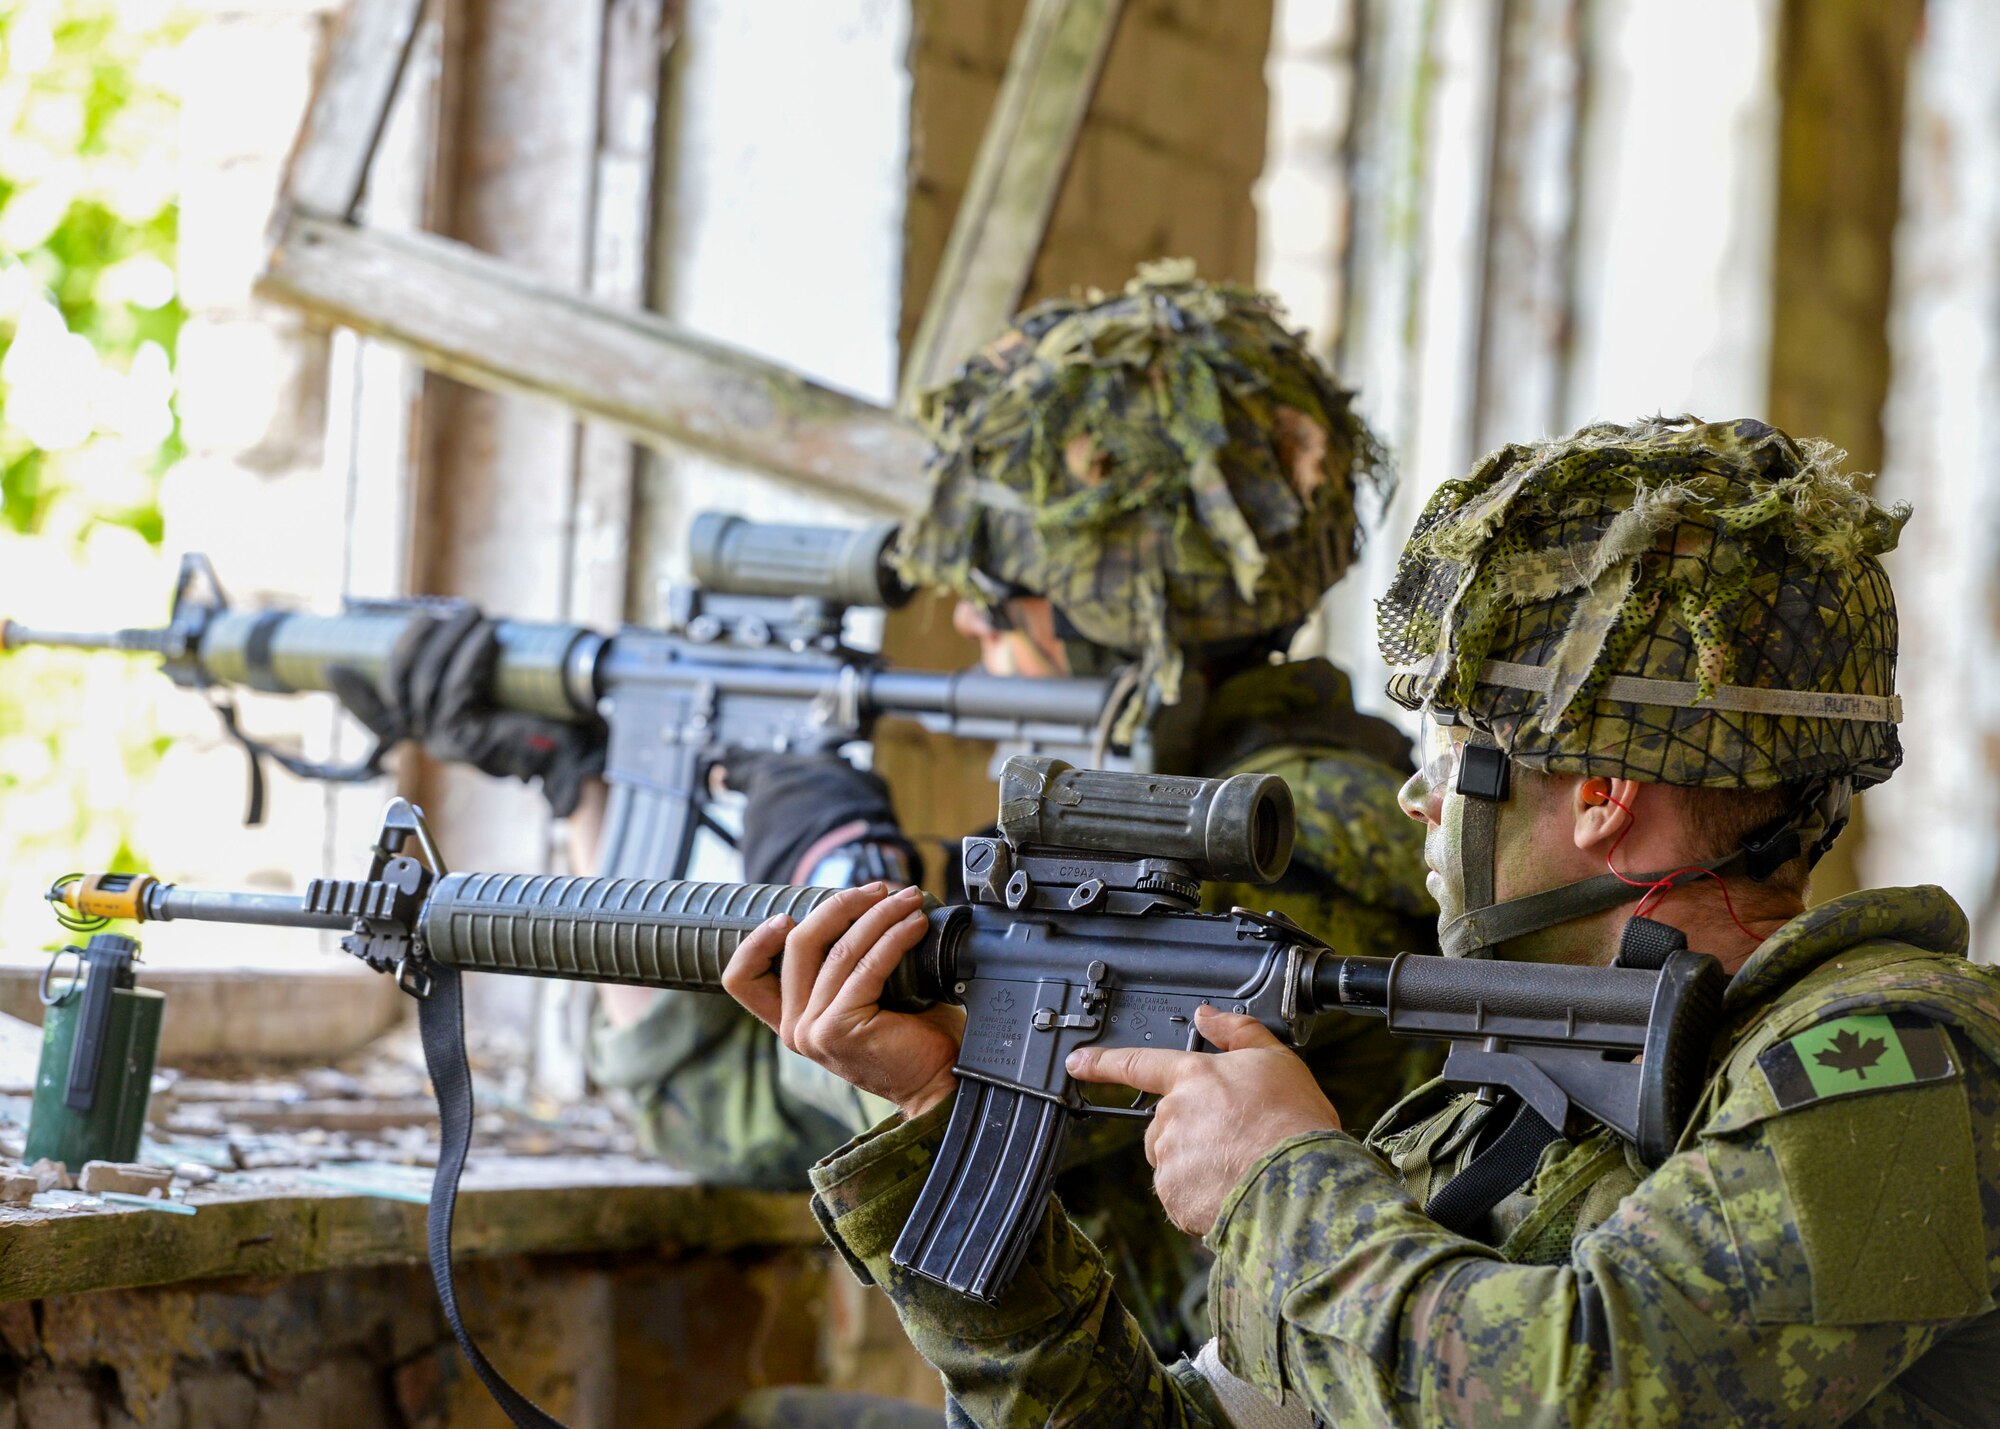 Members of a Canadian Platoon fire at opposing forces during an exercise in Skrunda, Latvia on June 13, 2018. Canadian forces were teamed with Spanish, Italian, and Latvian platoons to act as a defending force during a battle simulation for Saber Strike 18. Saber Strike included approximately 18,000 participants from 19 countries to continue building on interoperability. (U.S. Air Force photo by Staff Sgt. Jimmie D. Pike)